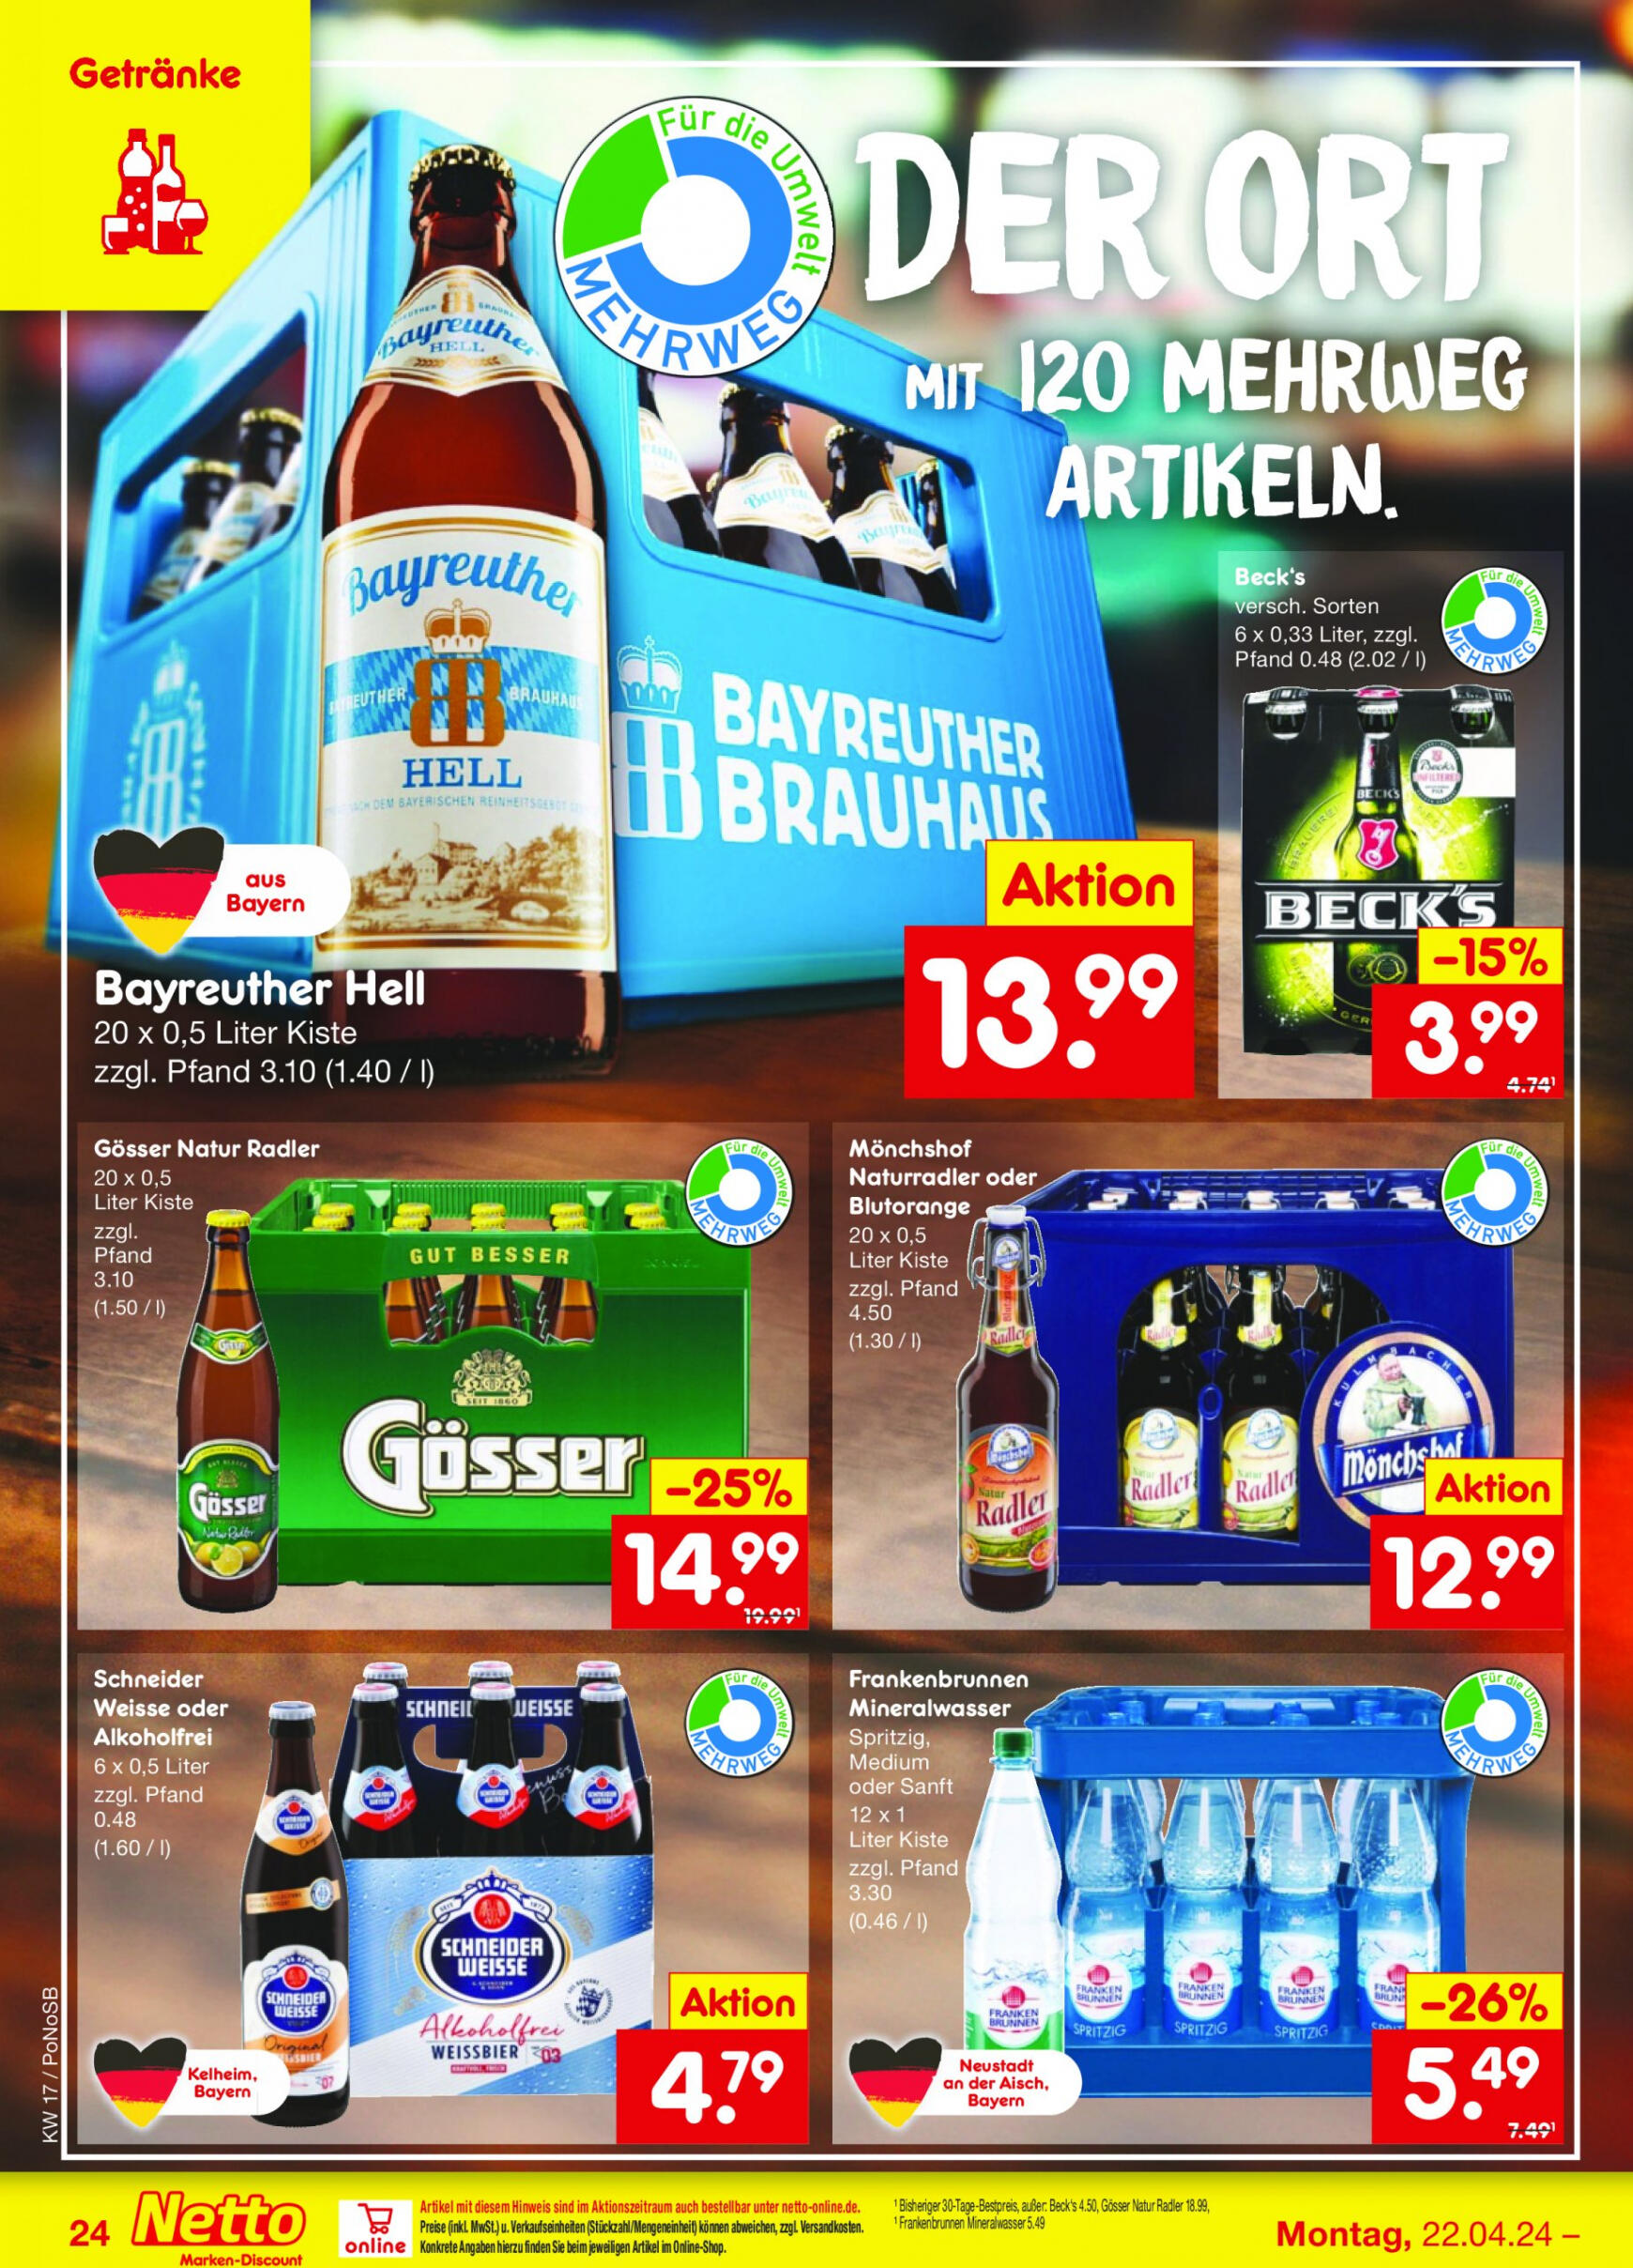 netto - Flyer Netto aktuell 22.04. - 27.04. - page: 26